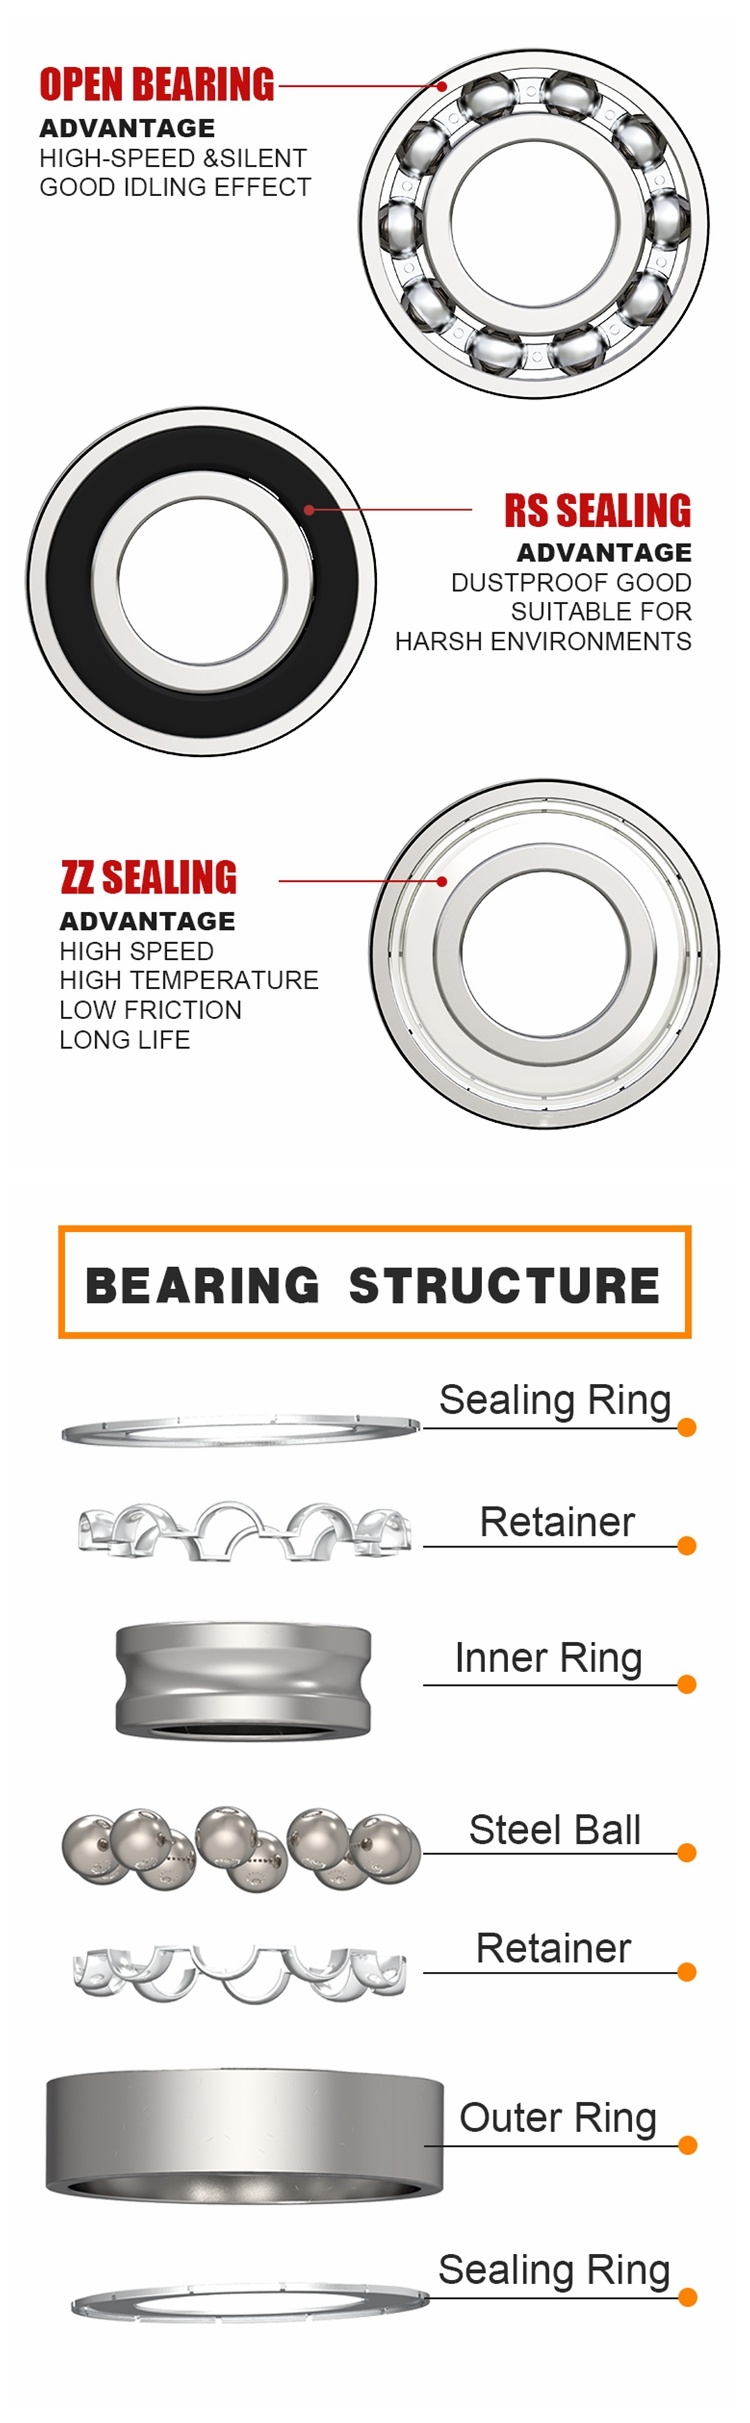 ABEC-3 Agriculture Bearing Z2 V2 Mr84 Micro Deep Groove Ball Bearings